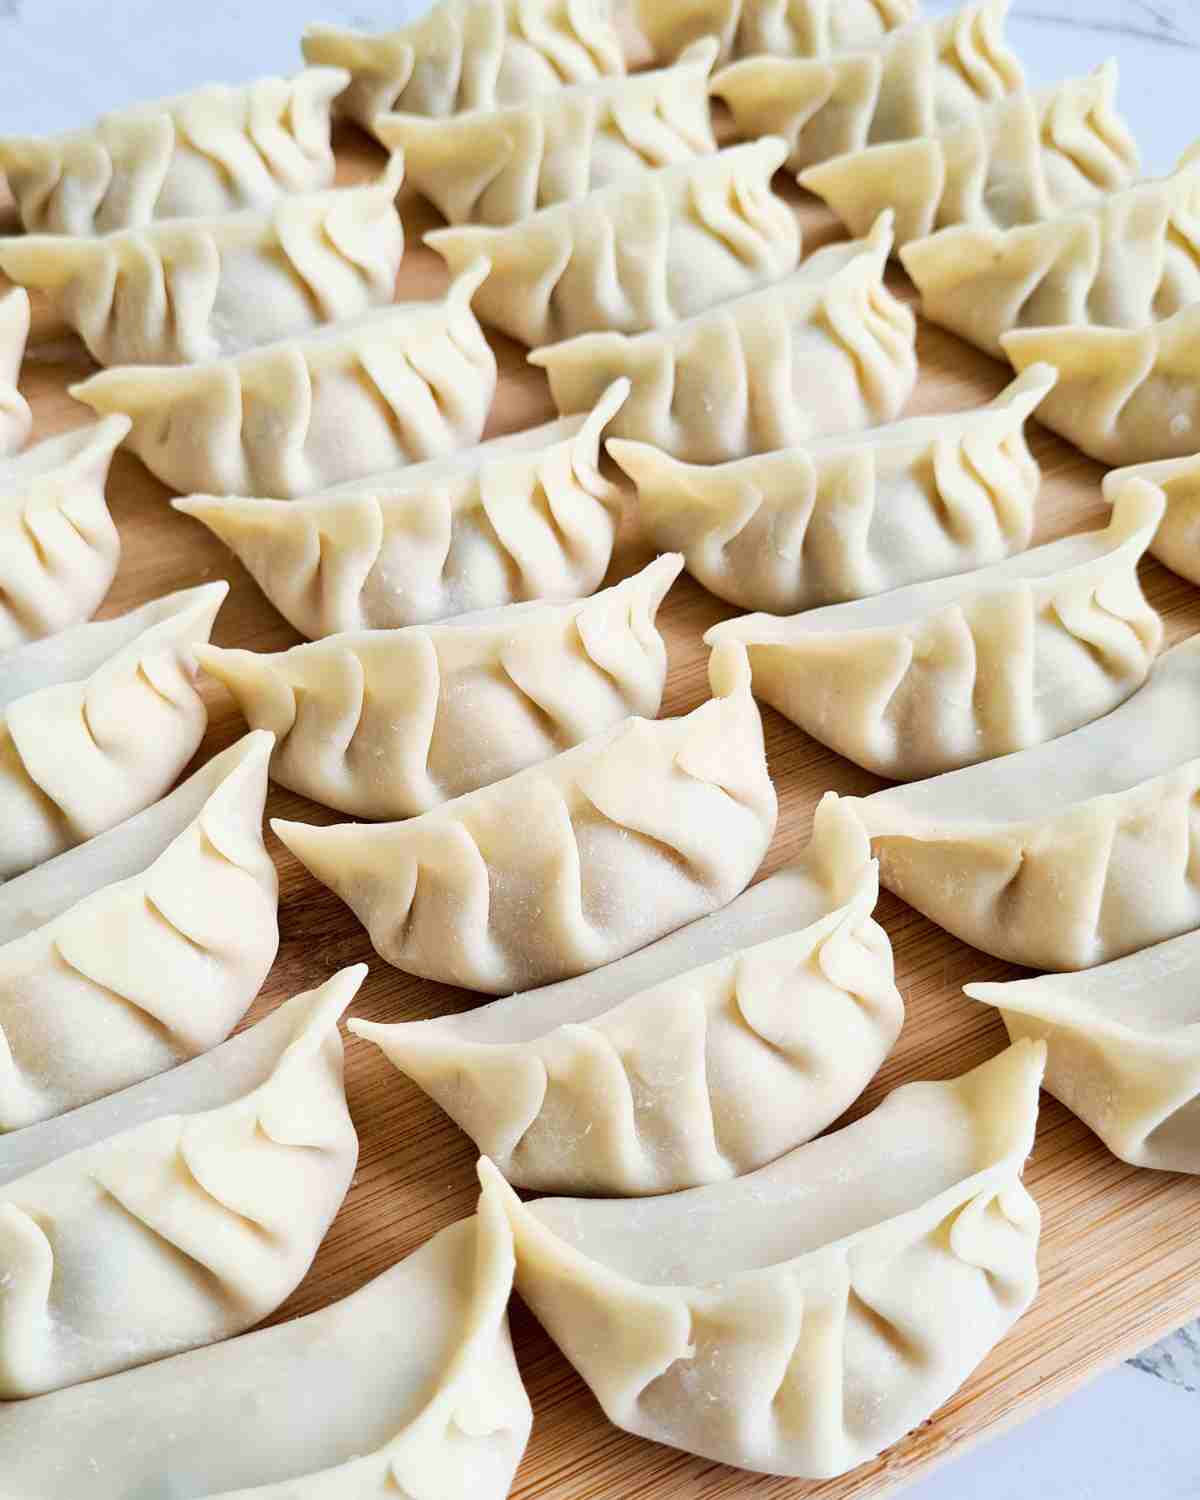 Rows of neatly wrapped dumplings on a wooden chopping board